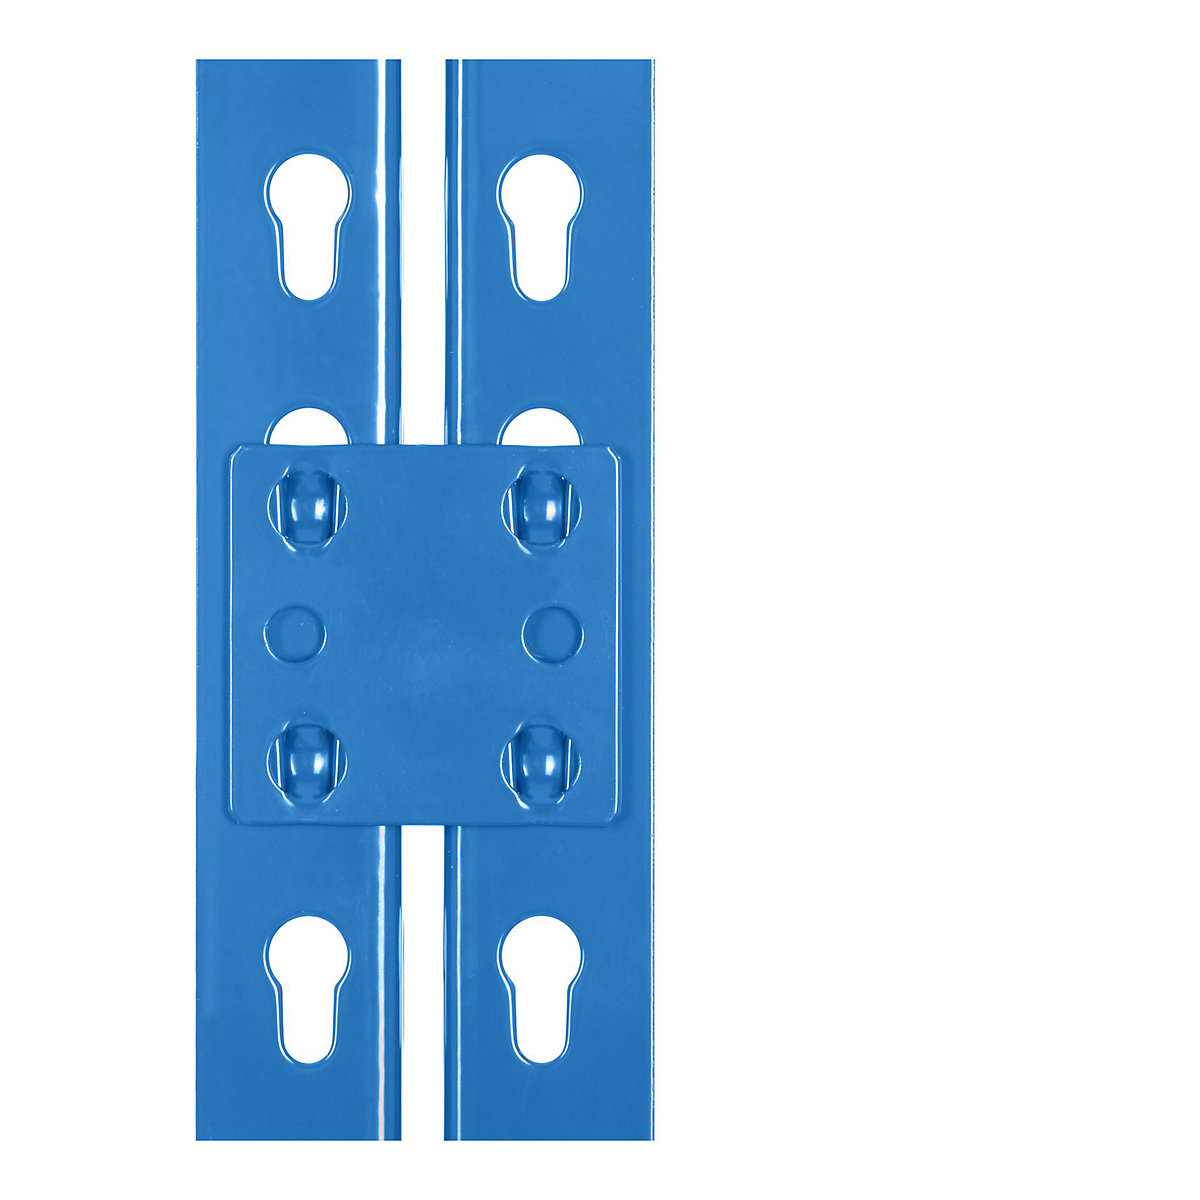 Tie plates for racking with 340 kg maximum load